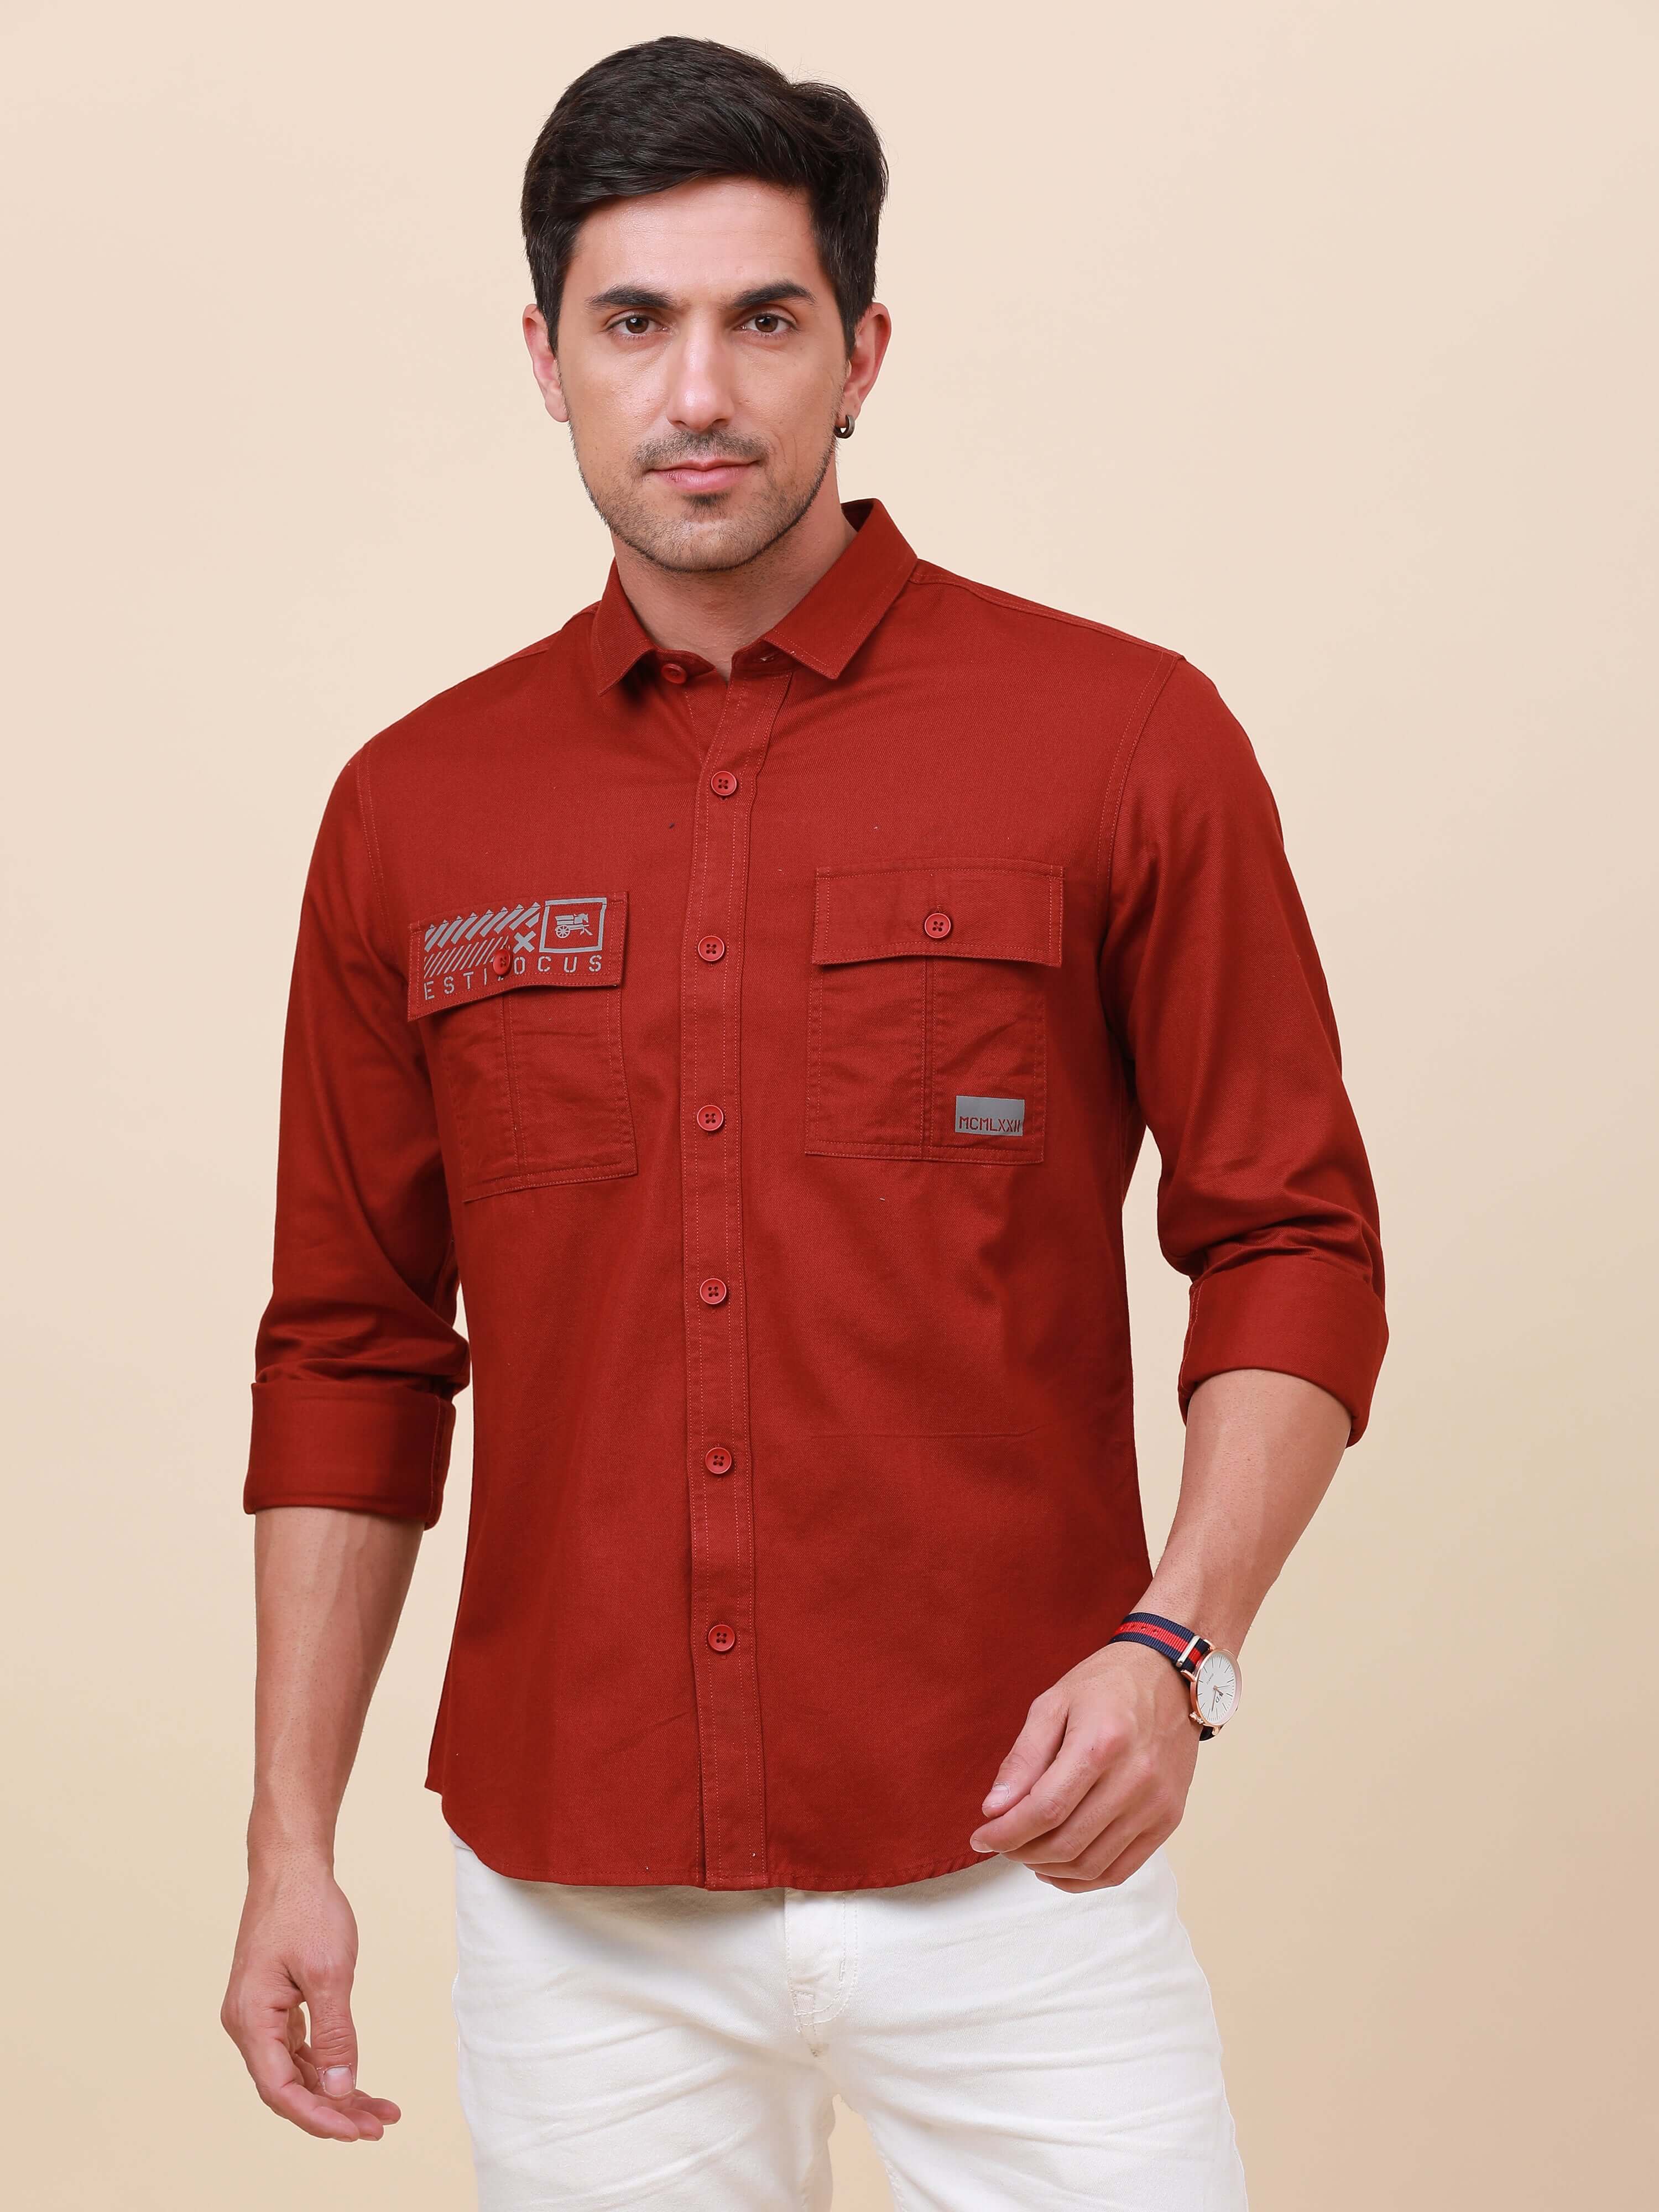 Rust Brown Solid Double Pocket Shirt shop online at Estilocus. 100% Cotton , Full-sleeve solid shirt Cut and sew placket Regular collar Double button edge cuff Double pocket with flap Curved bottom hemline Finest printing at pocket . All double needle con